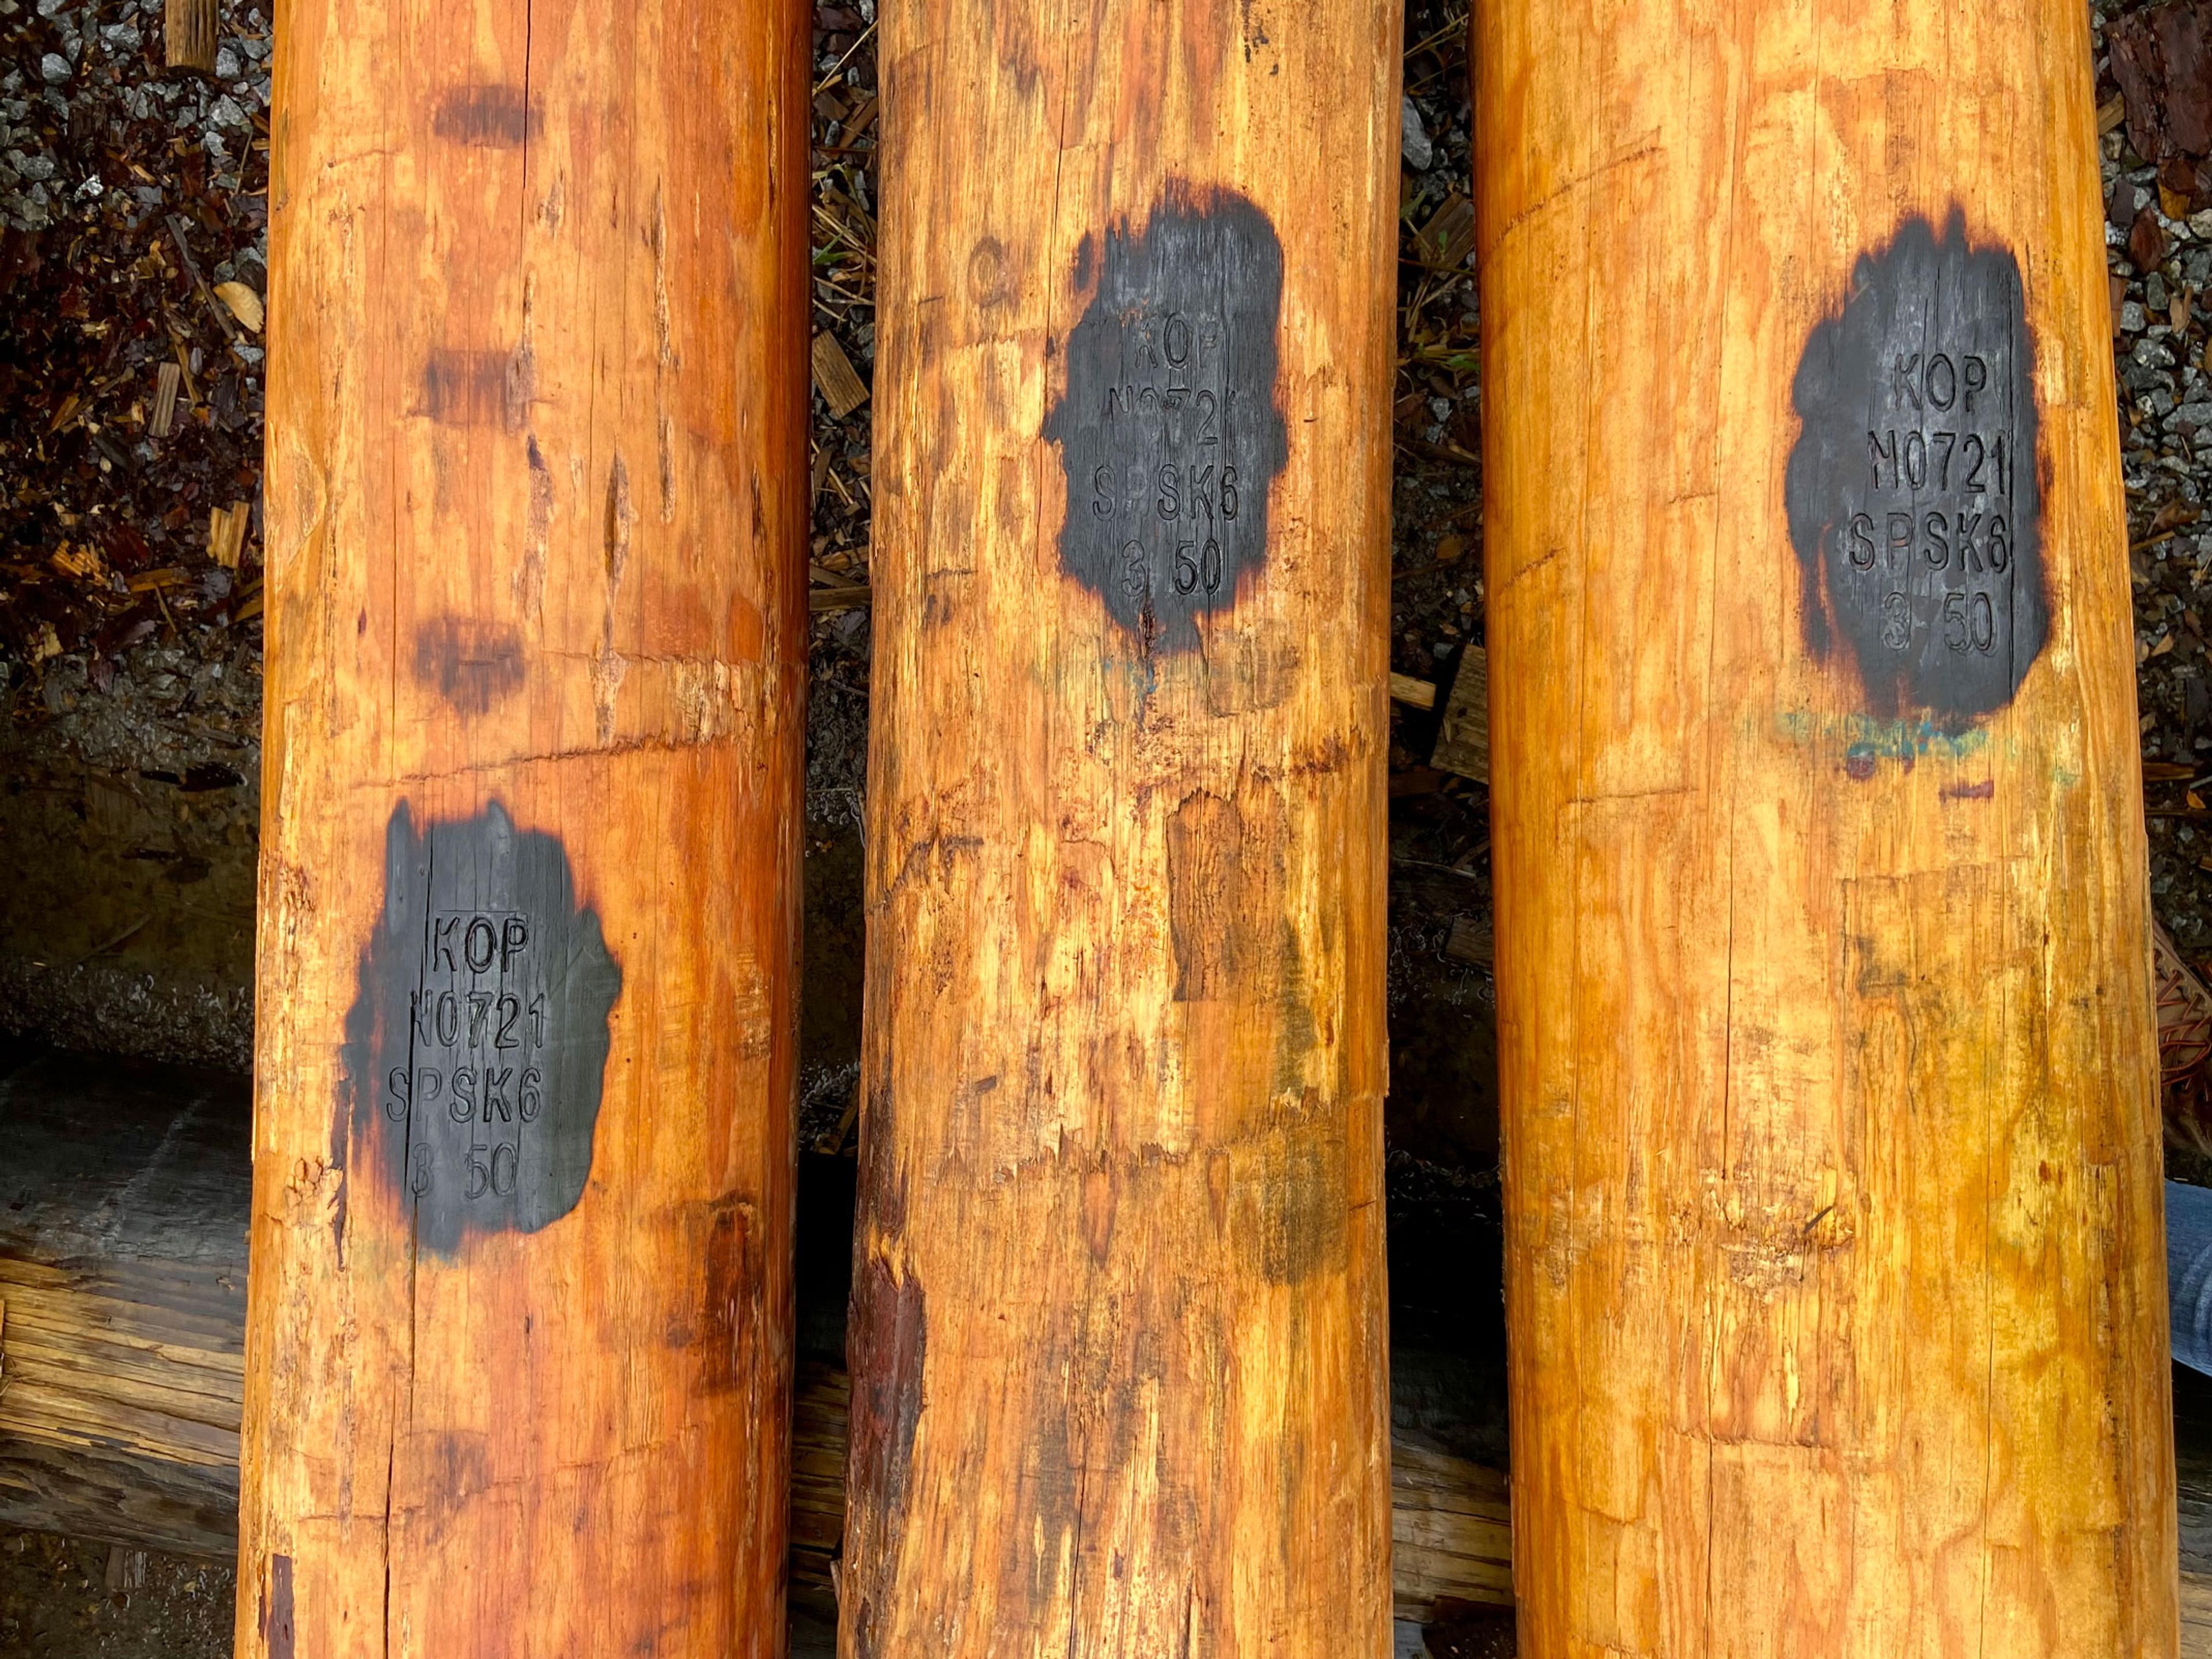 Utility poles with Koppers' mark